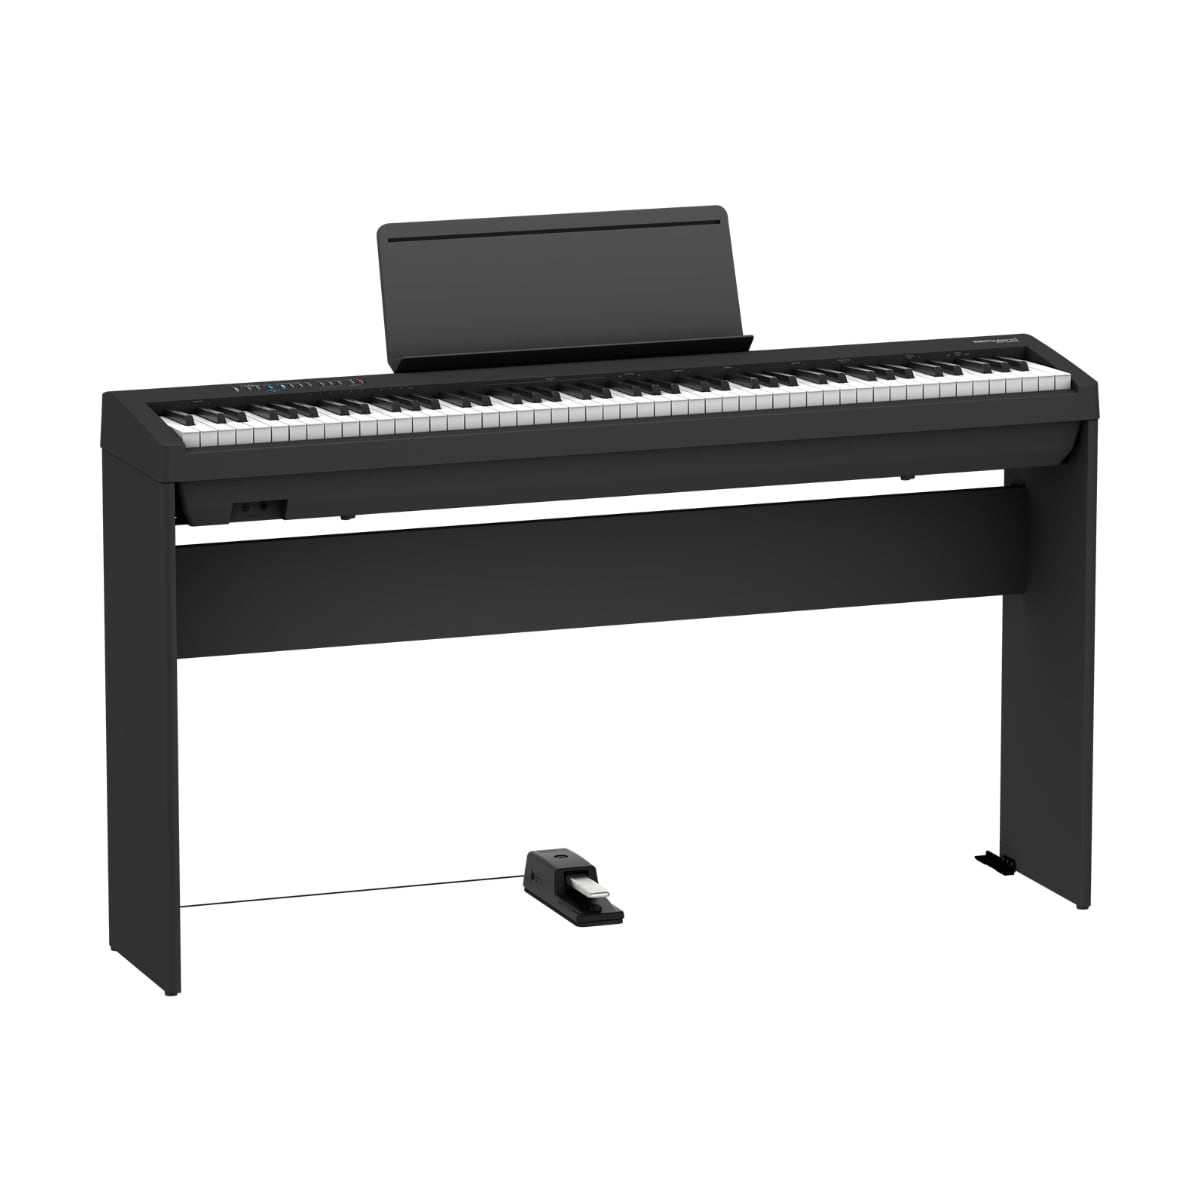 Roland FP-30X Digital Piano Bundle Keyboard w/ Stand and Pedal Black